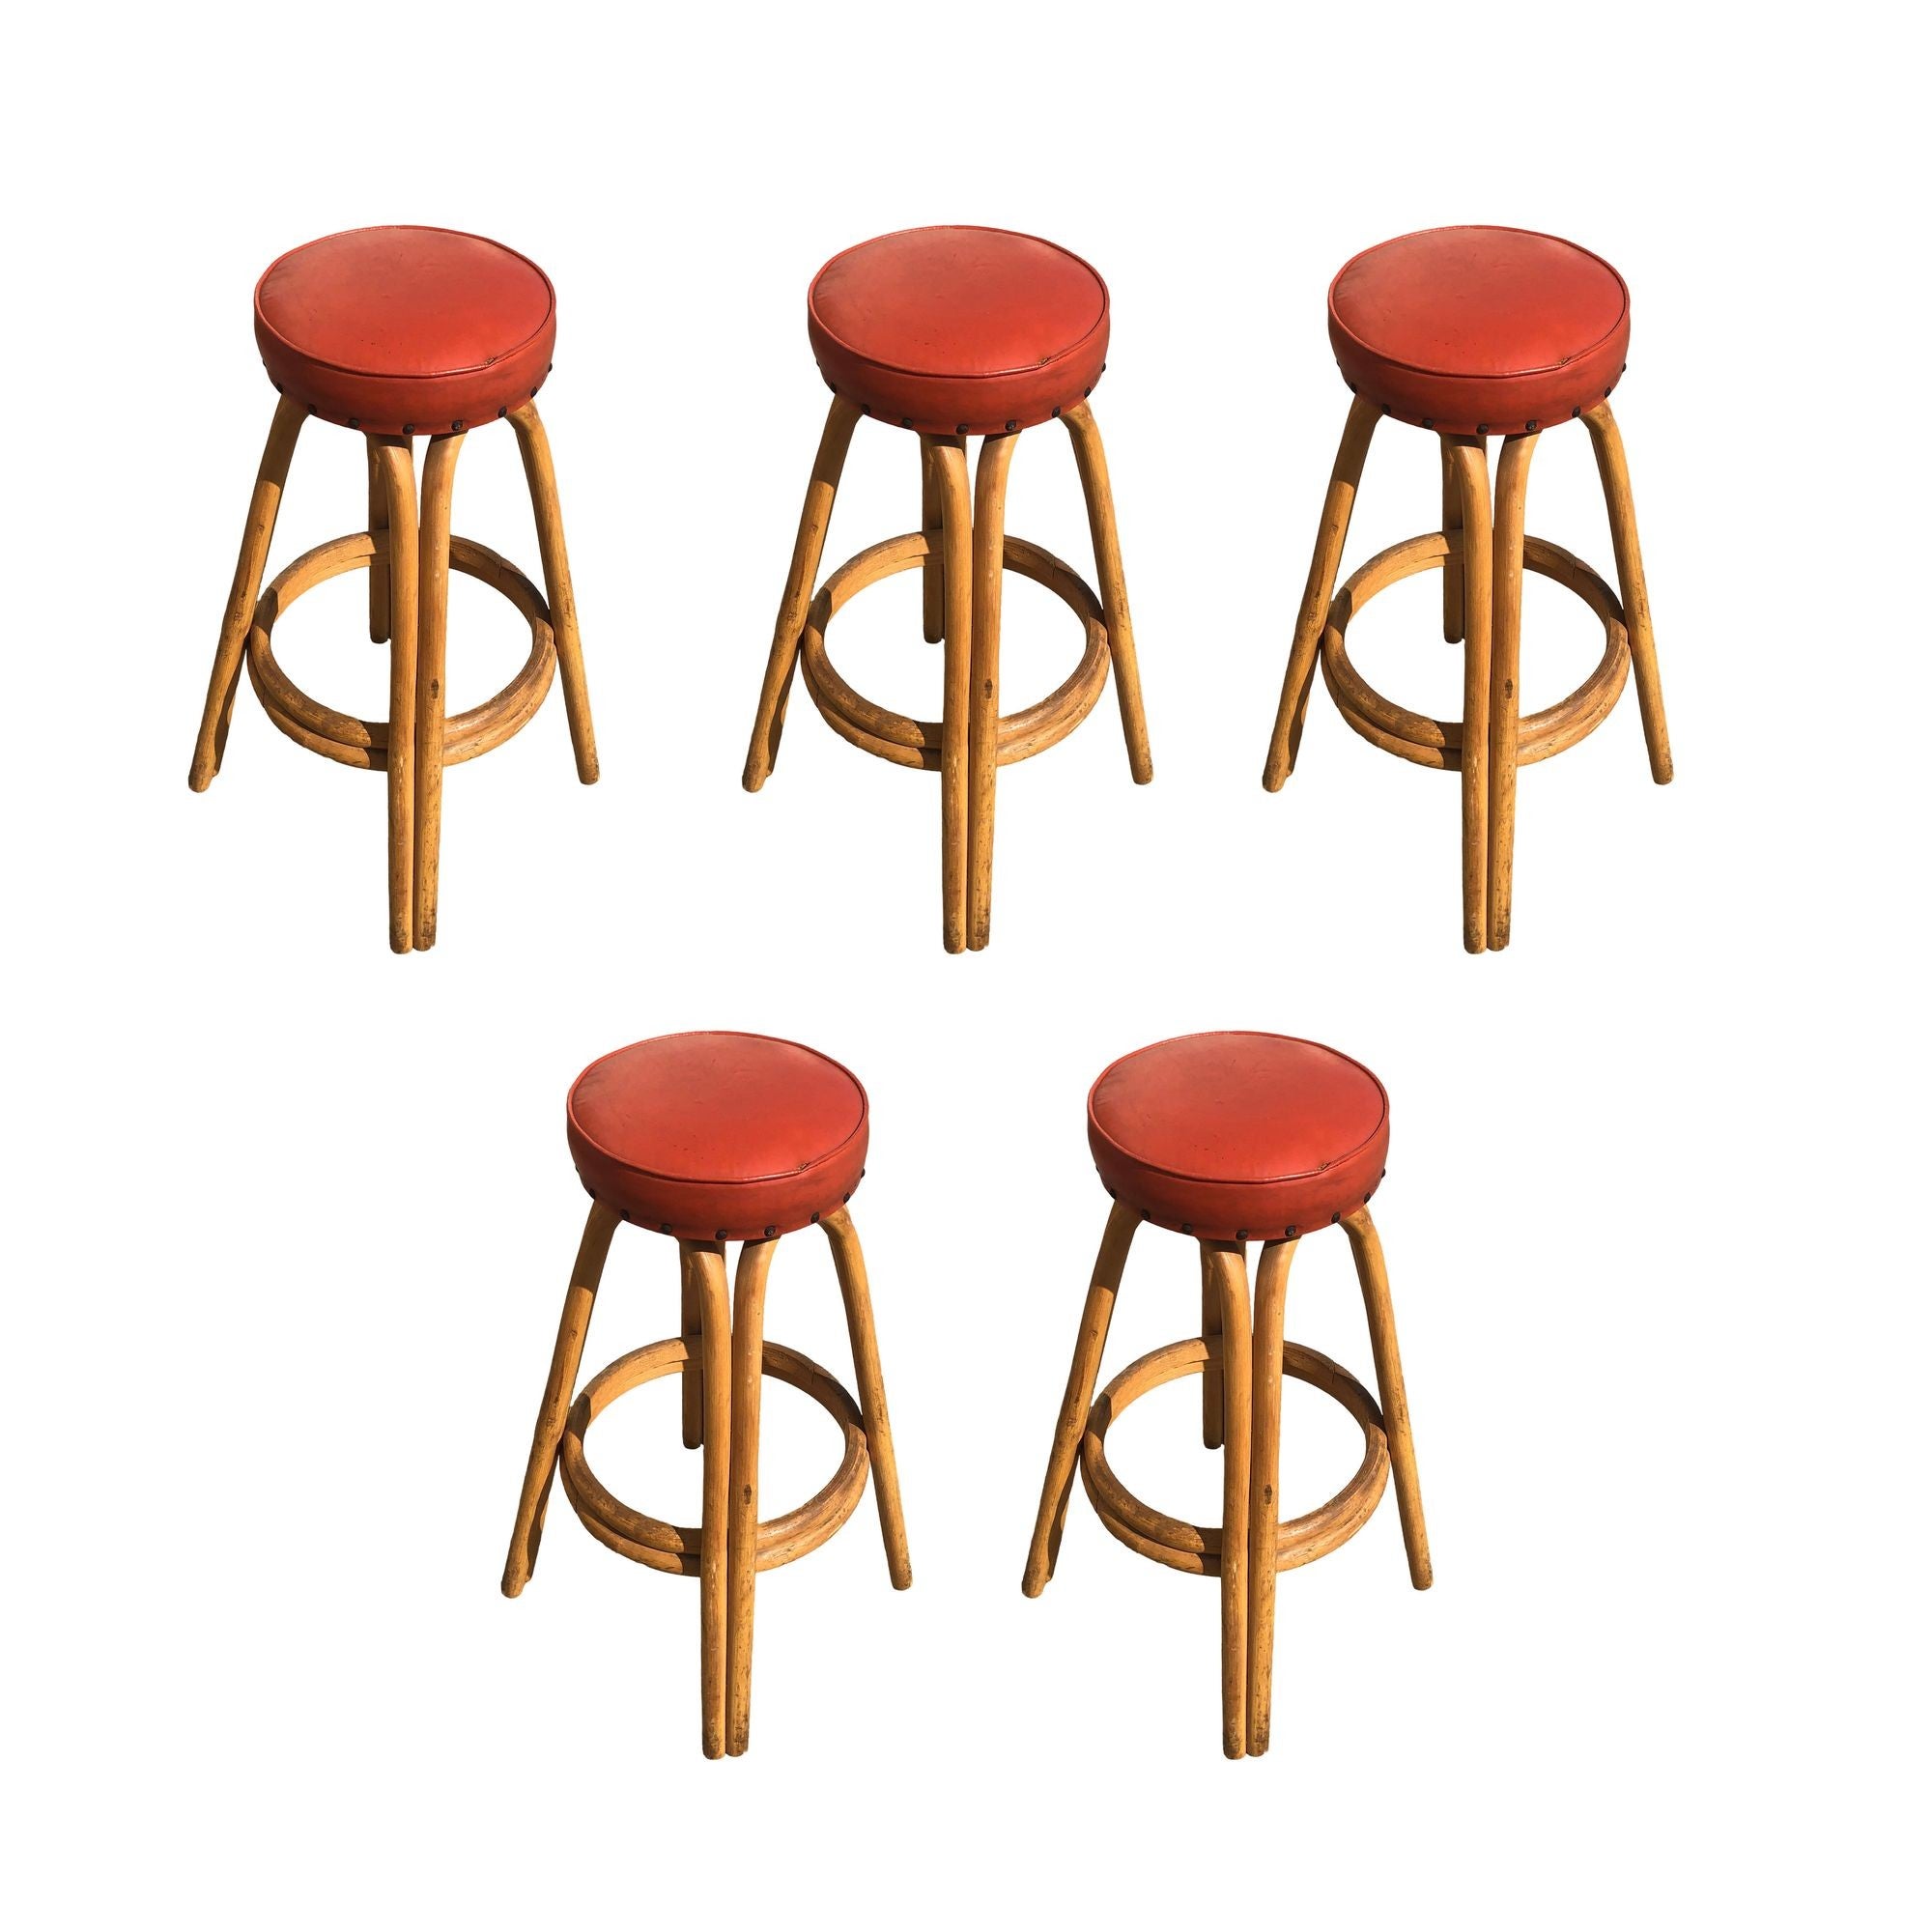 Restored arched Rattan Bar Stools w/ Studded Nailhead Red Seats, Set of 5 For Sale